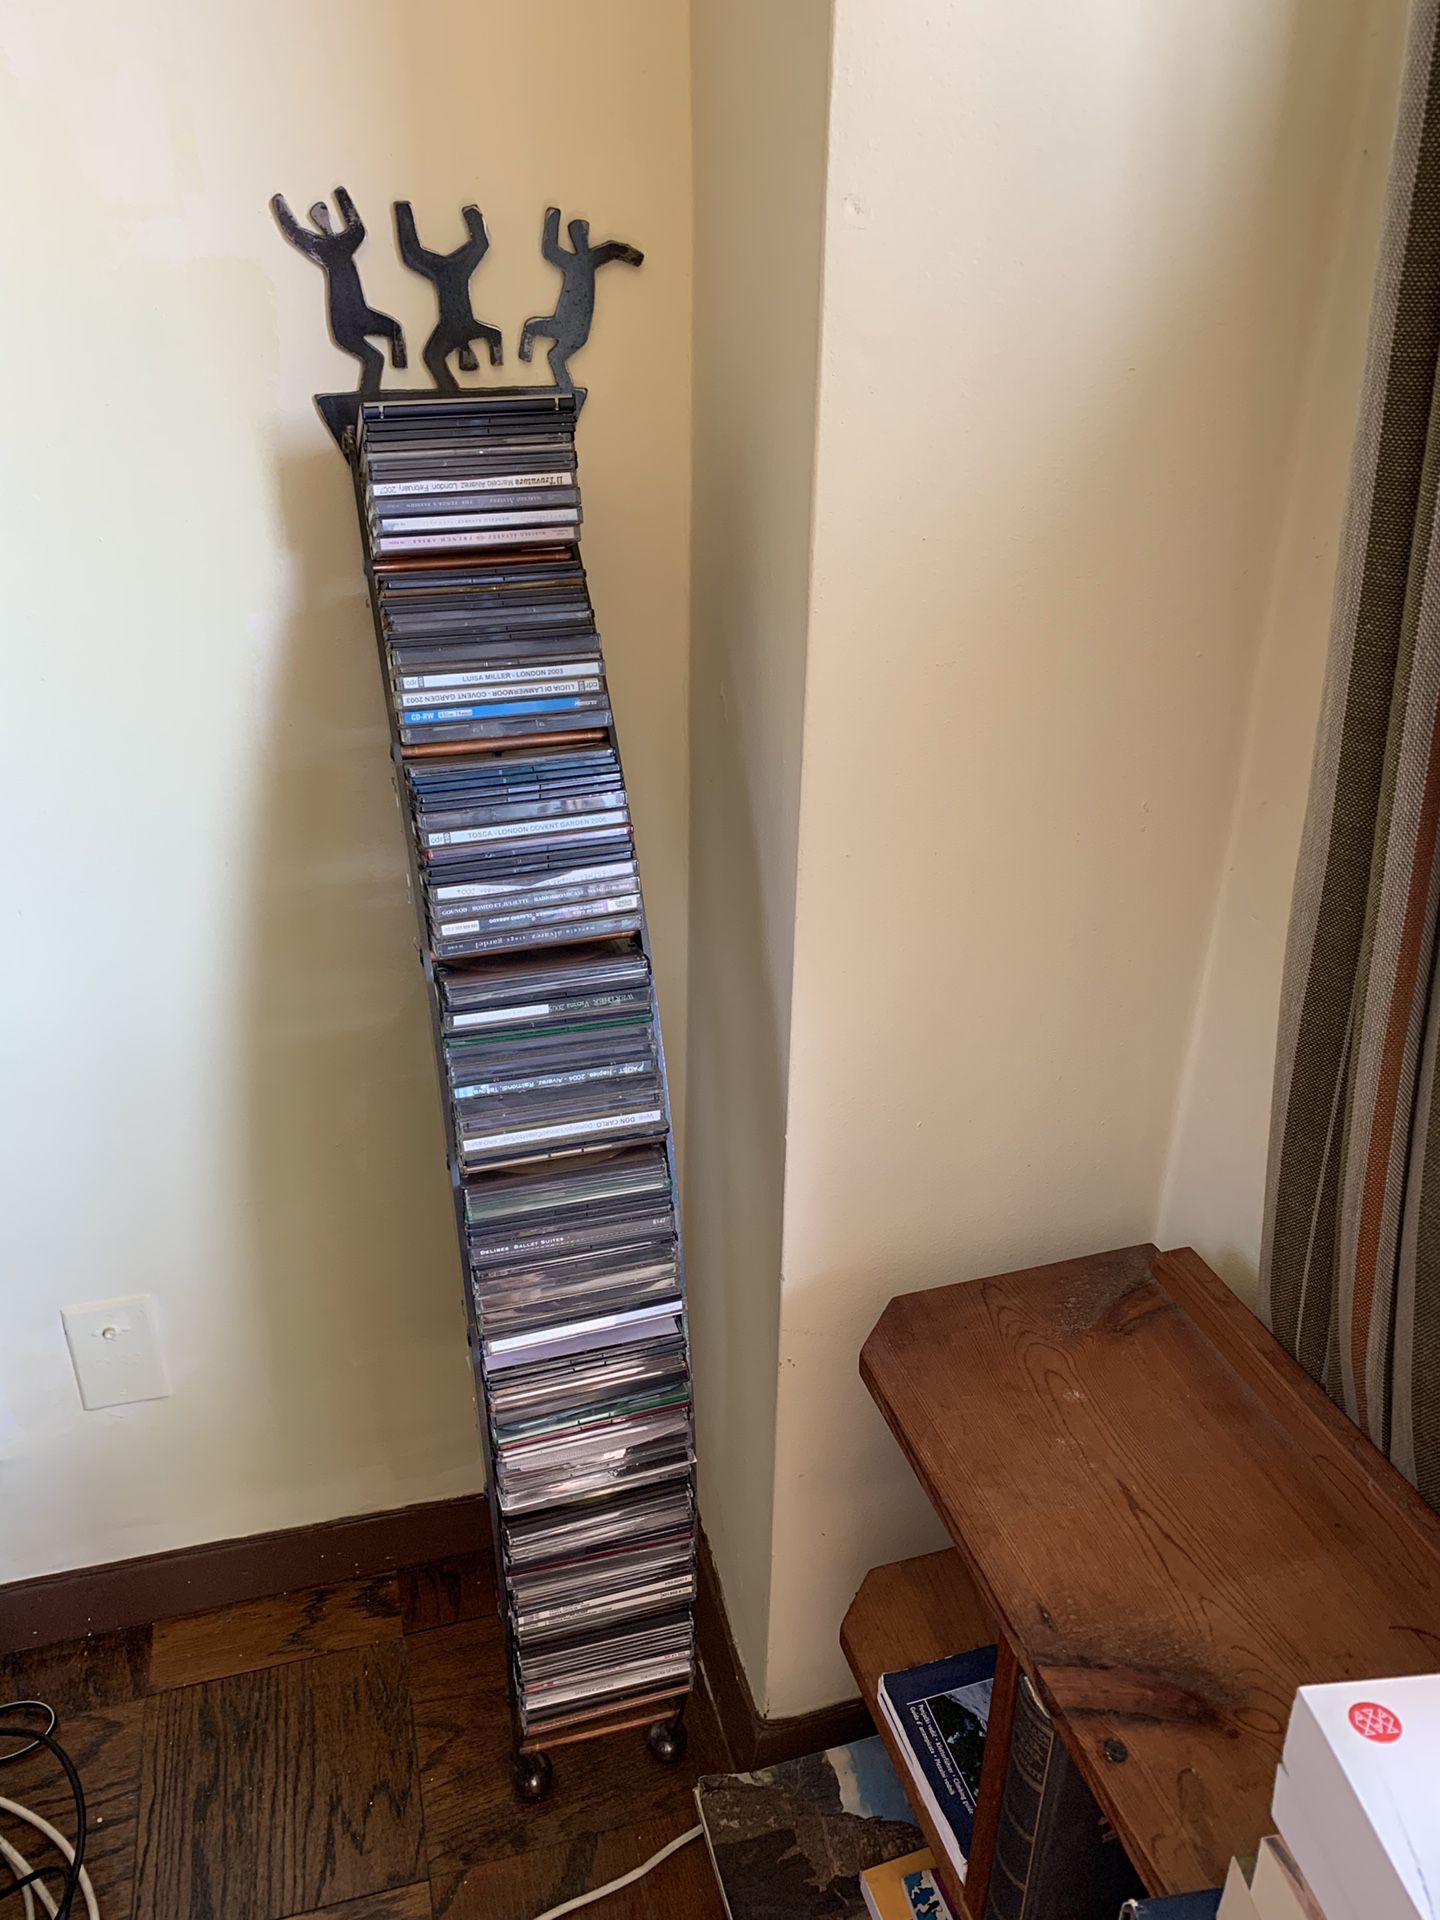 CD or DVD stand